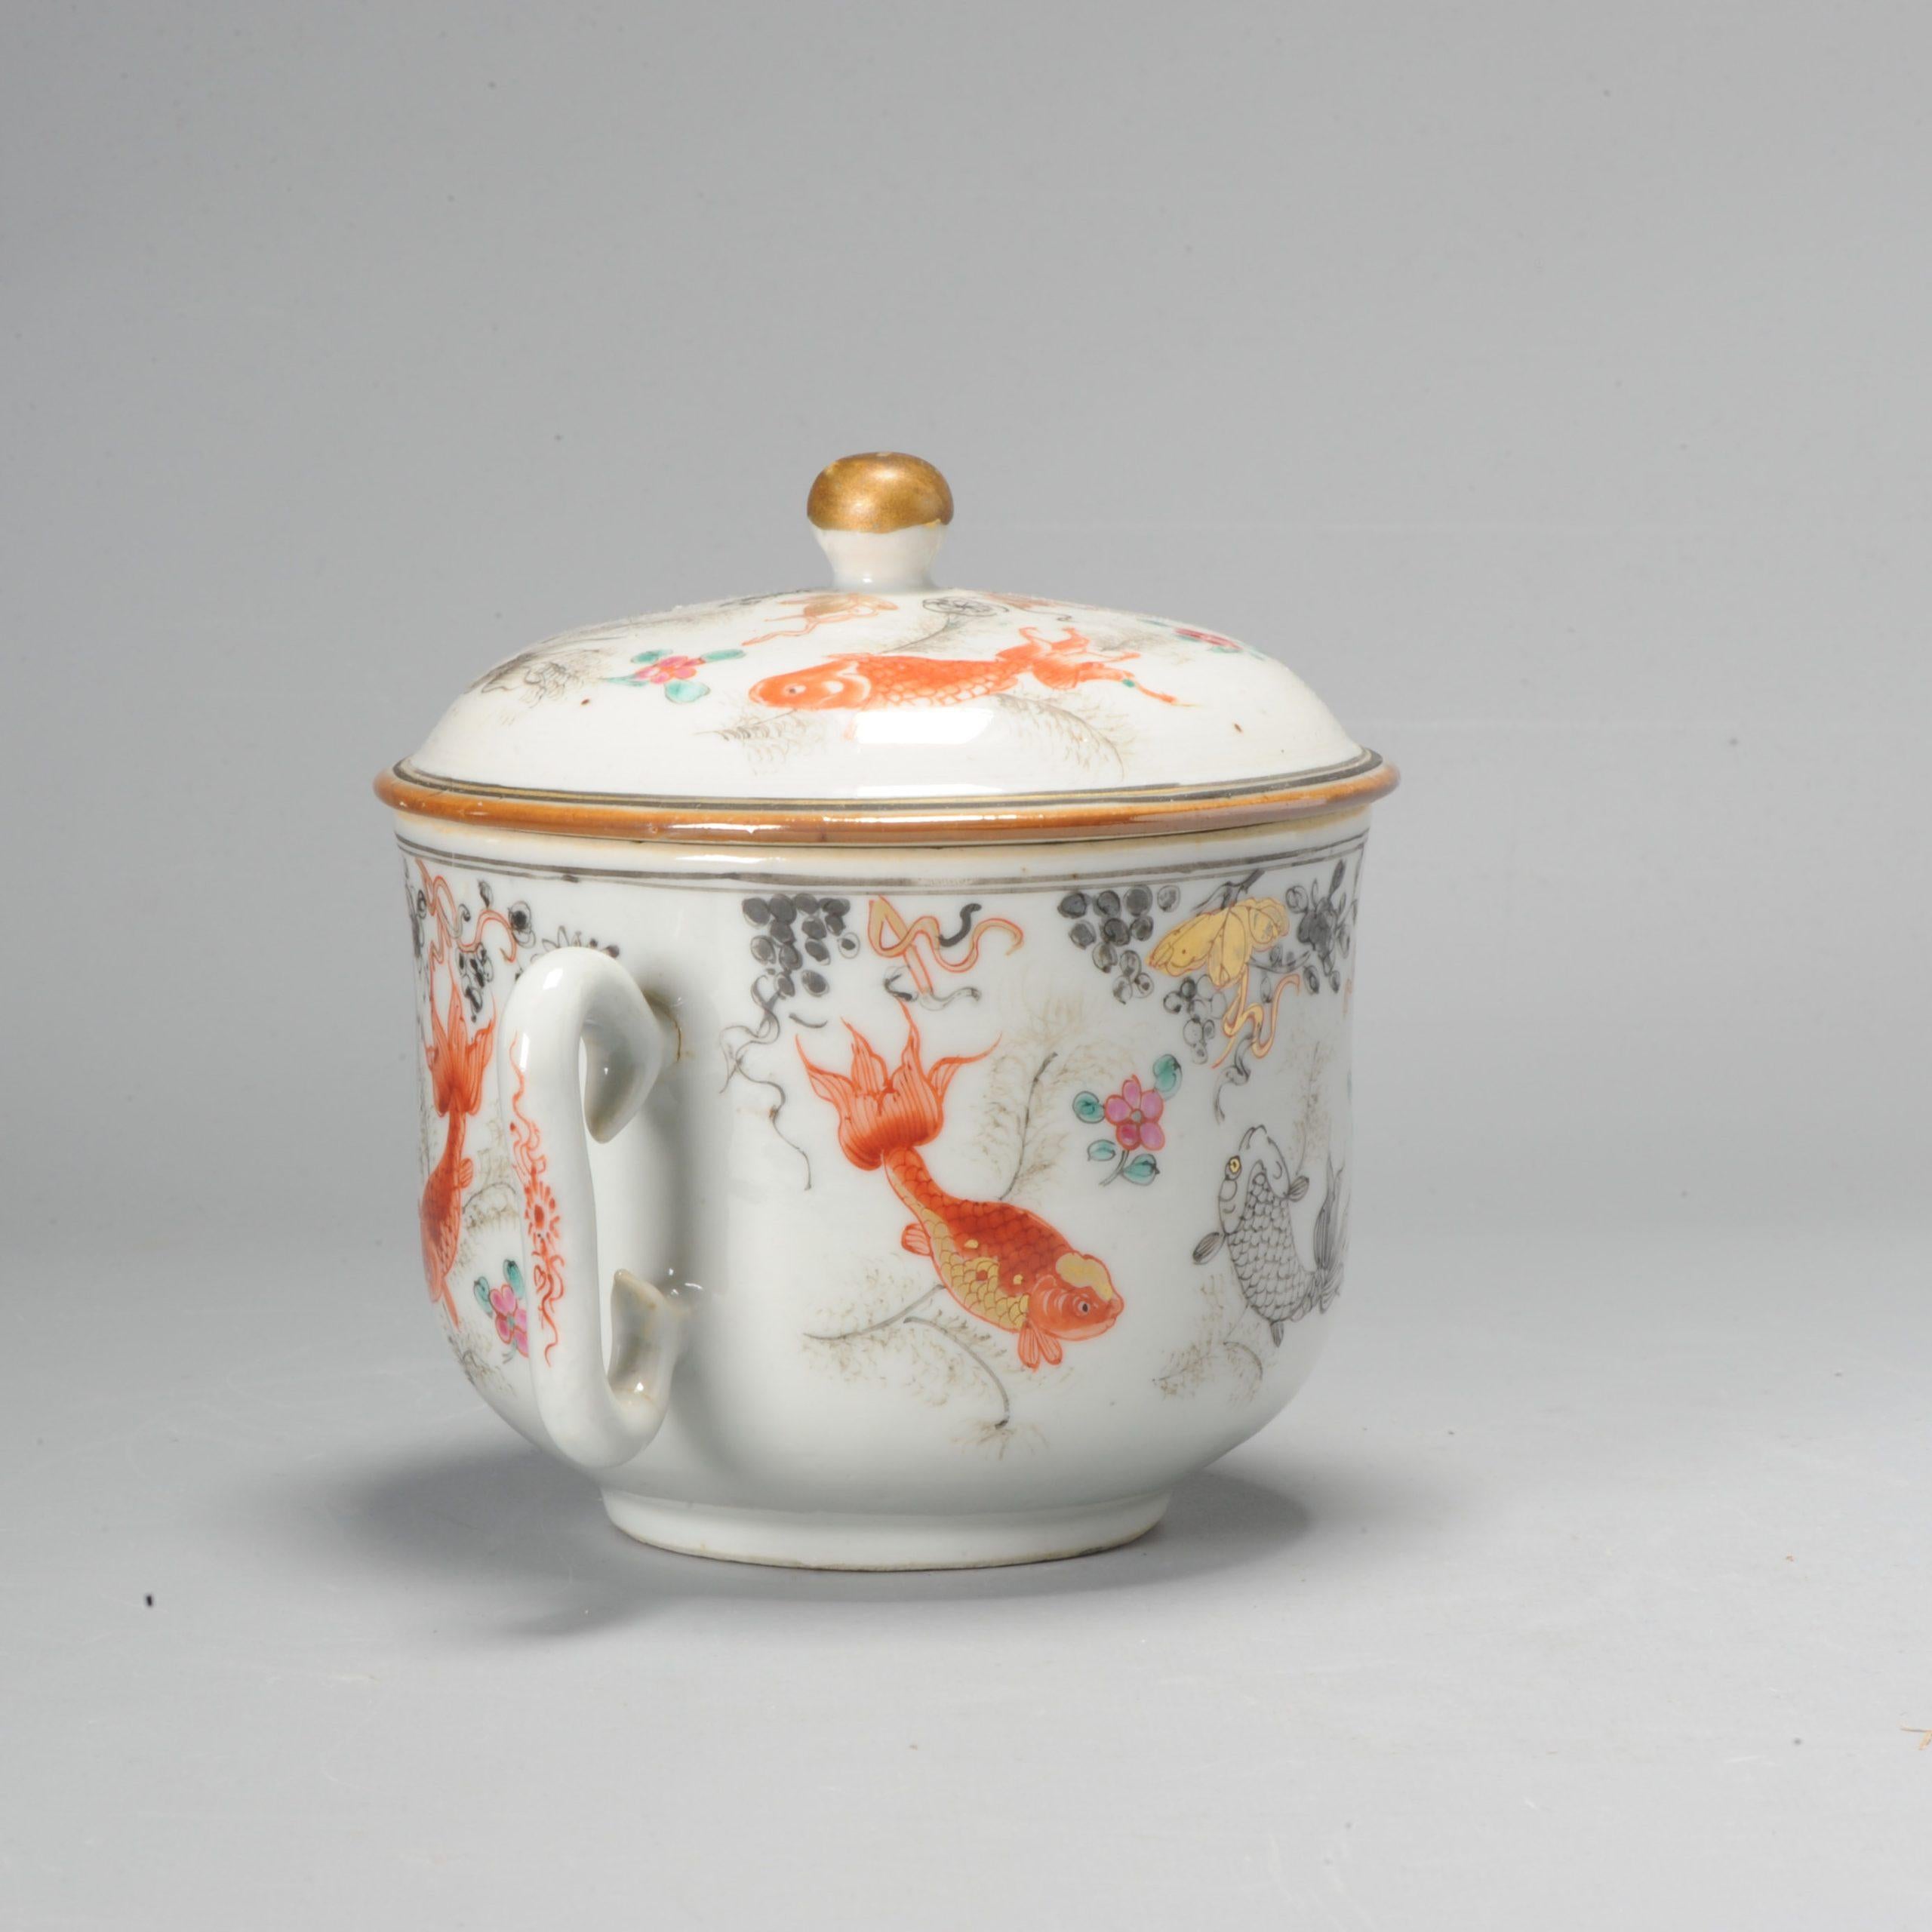 This nicely shaped and painted chinese porcelain jar. With scene of goldfishes.

Additional information:
Material: Porcelain & Pottery
Region of Origin: China
Emperor: Qianlong (1735-1796), Yongzheng (1722-1735)
Period: 18th century Qing (1661 -